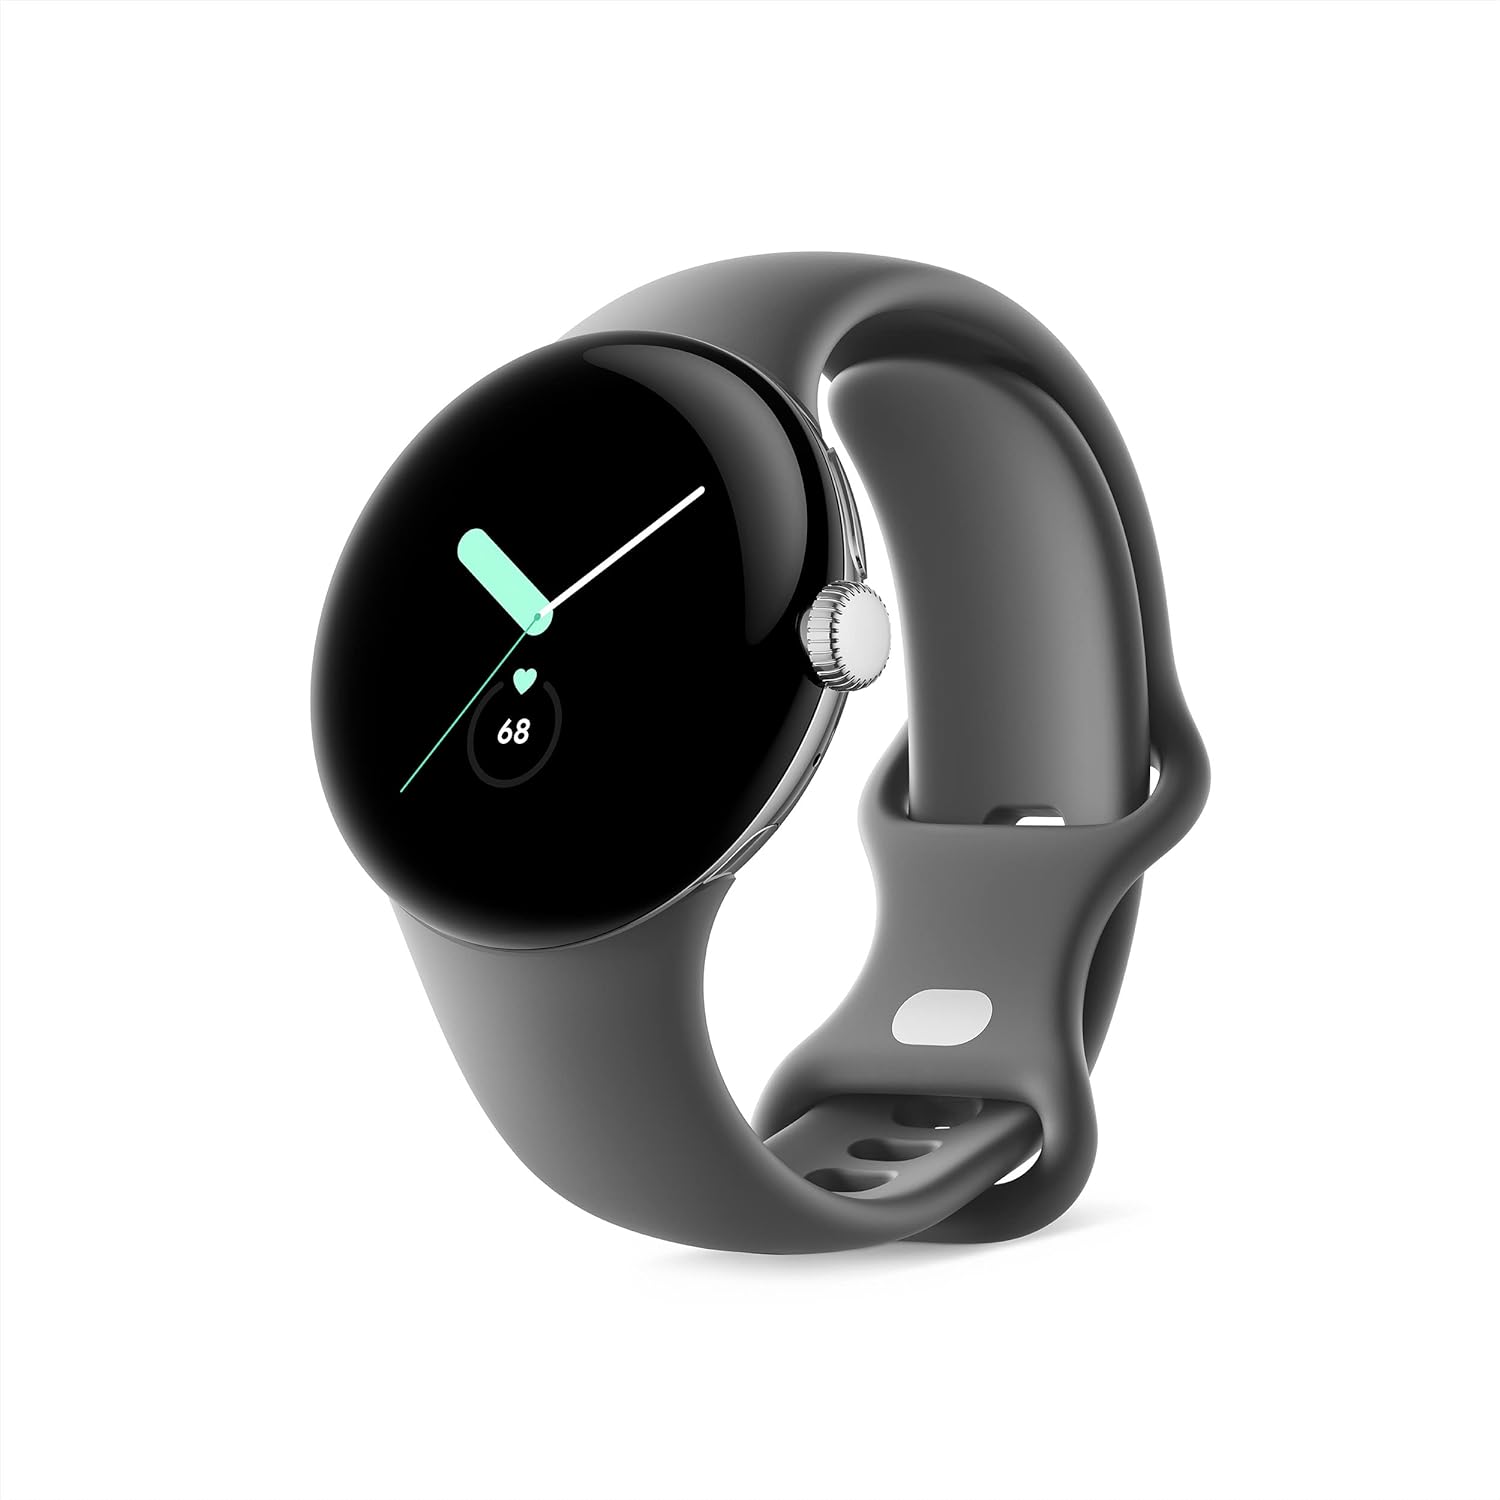 Google Pixel Watch - Android Smartwatch with Fitbit Activity Tracking - Heart Rate Tracking Watch Polished Silver Stainless Steel case with Charcoal Active band - WiFi - $180.49